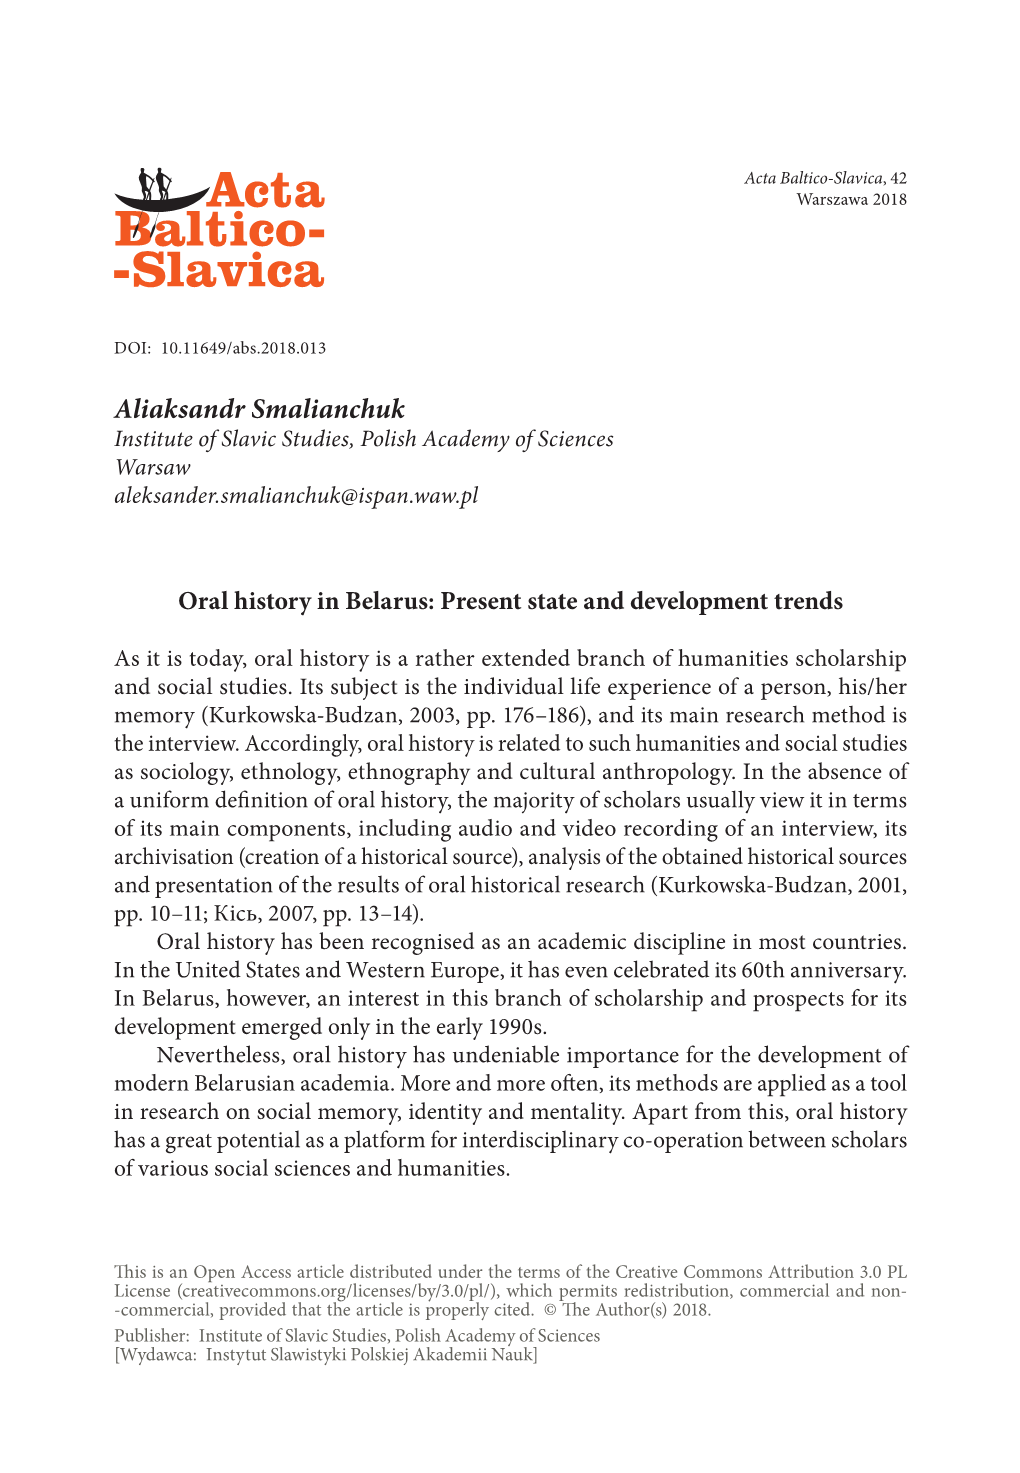 Oral History in Belarus: Present State and Development Trends